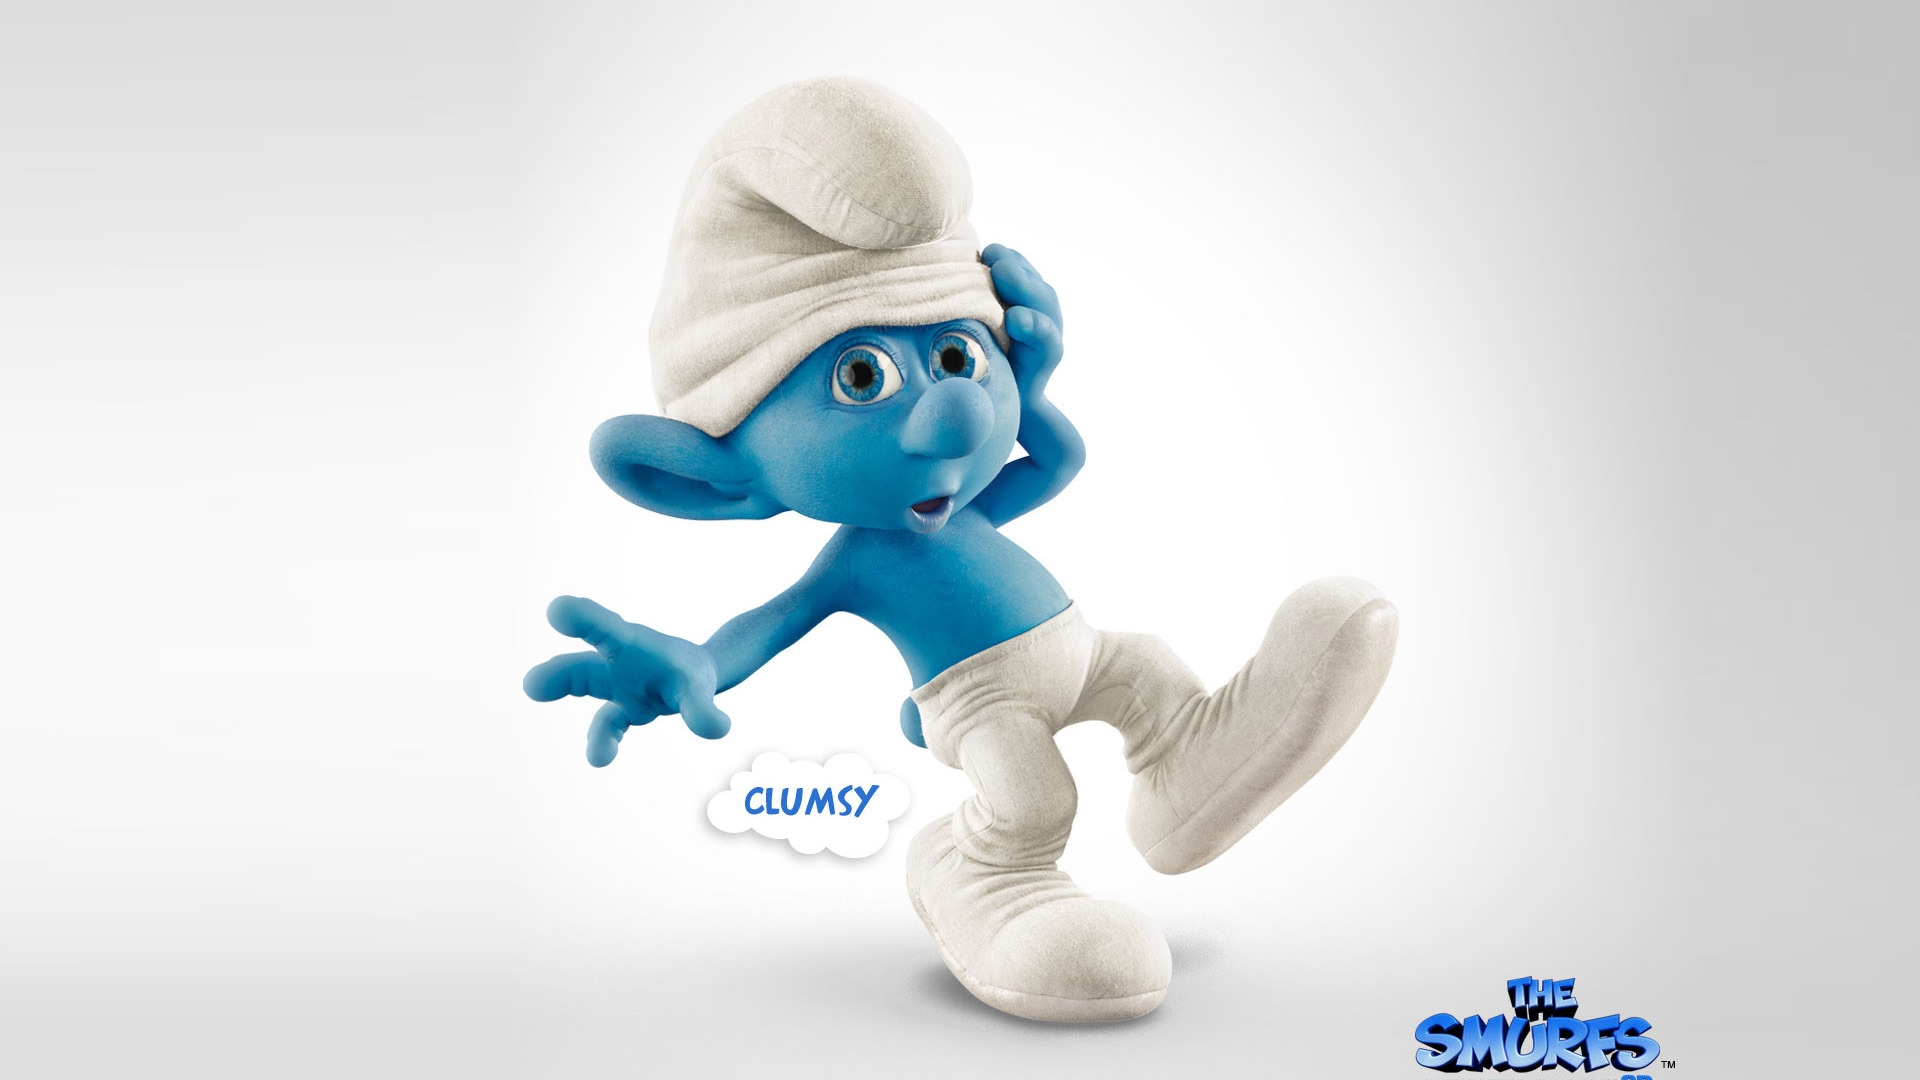 Clumsy Smurfs 2 for 1920 x 1080 HDTV 1080p resolution